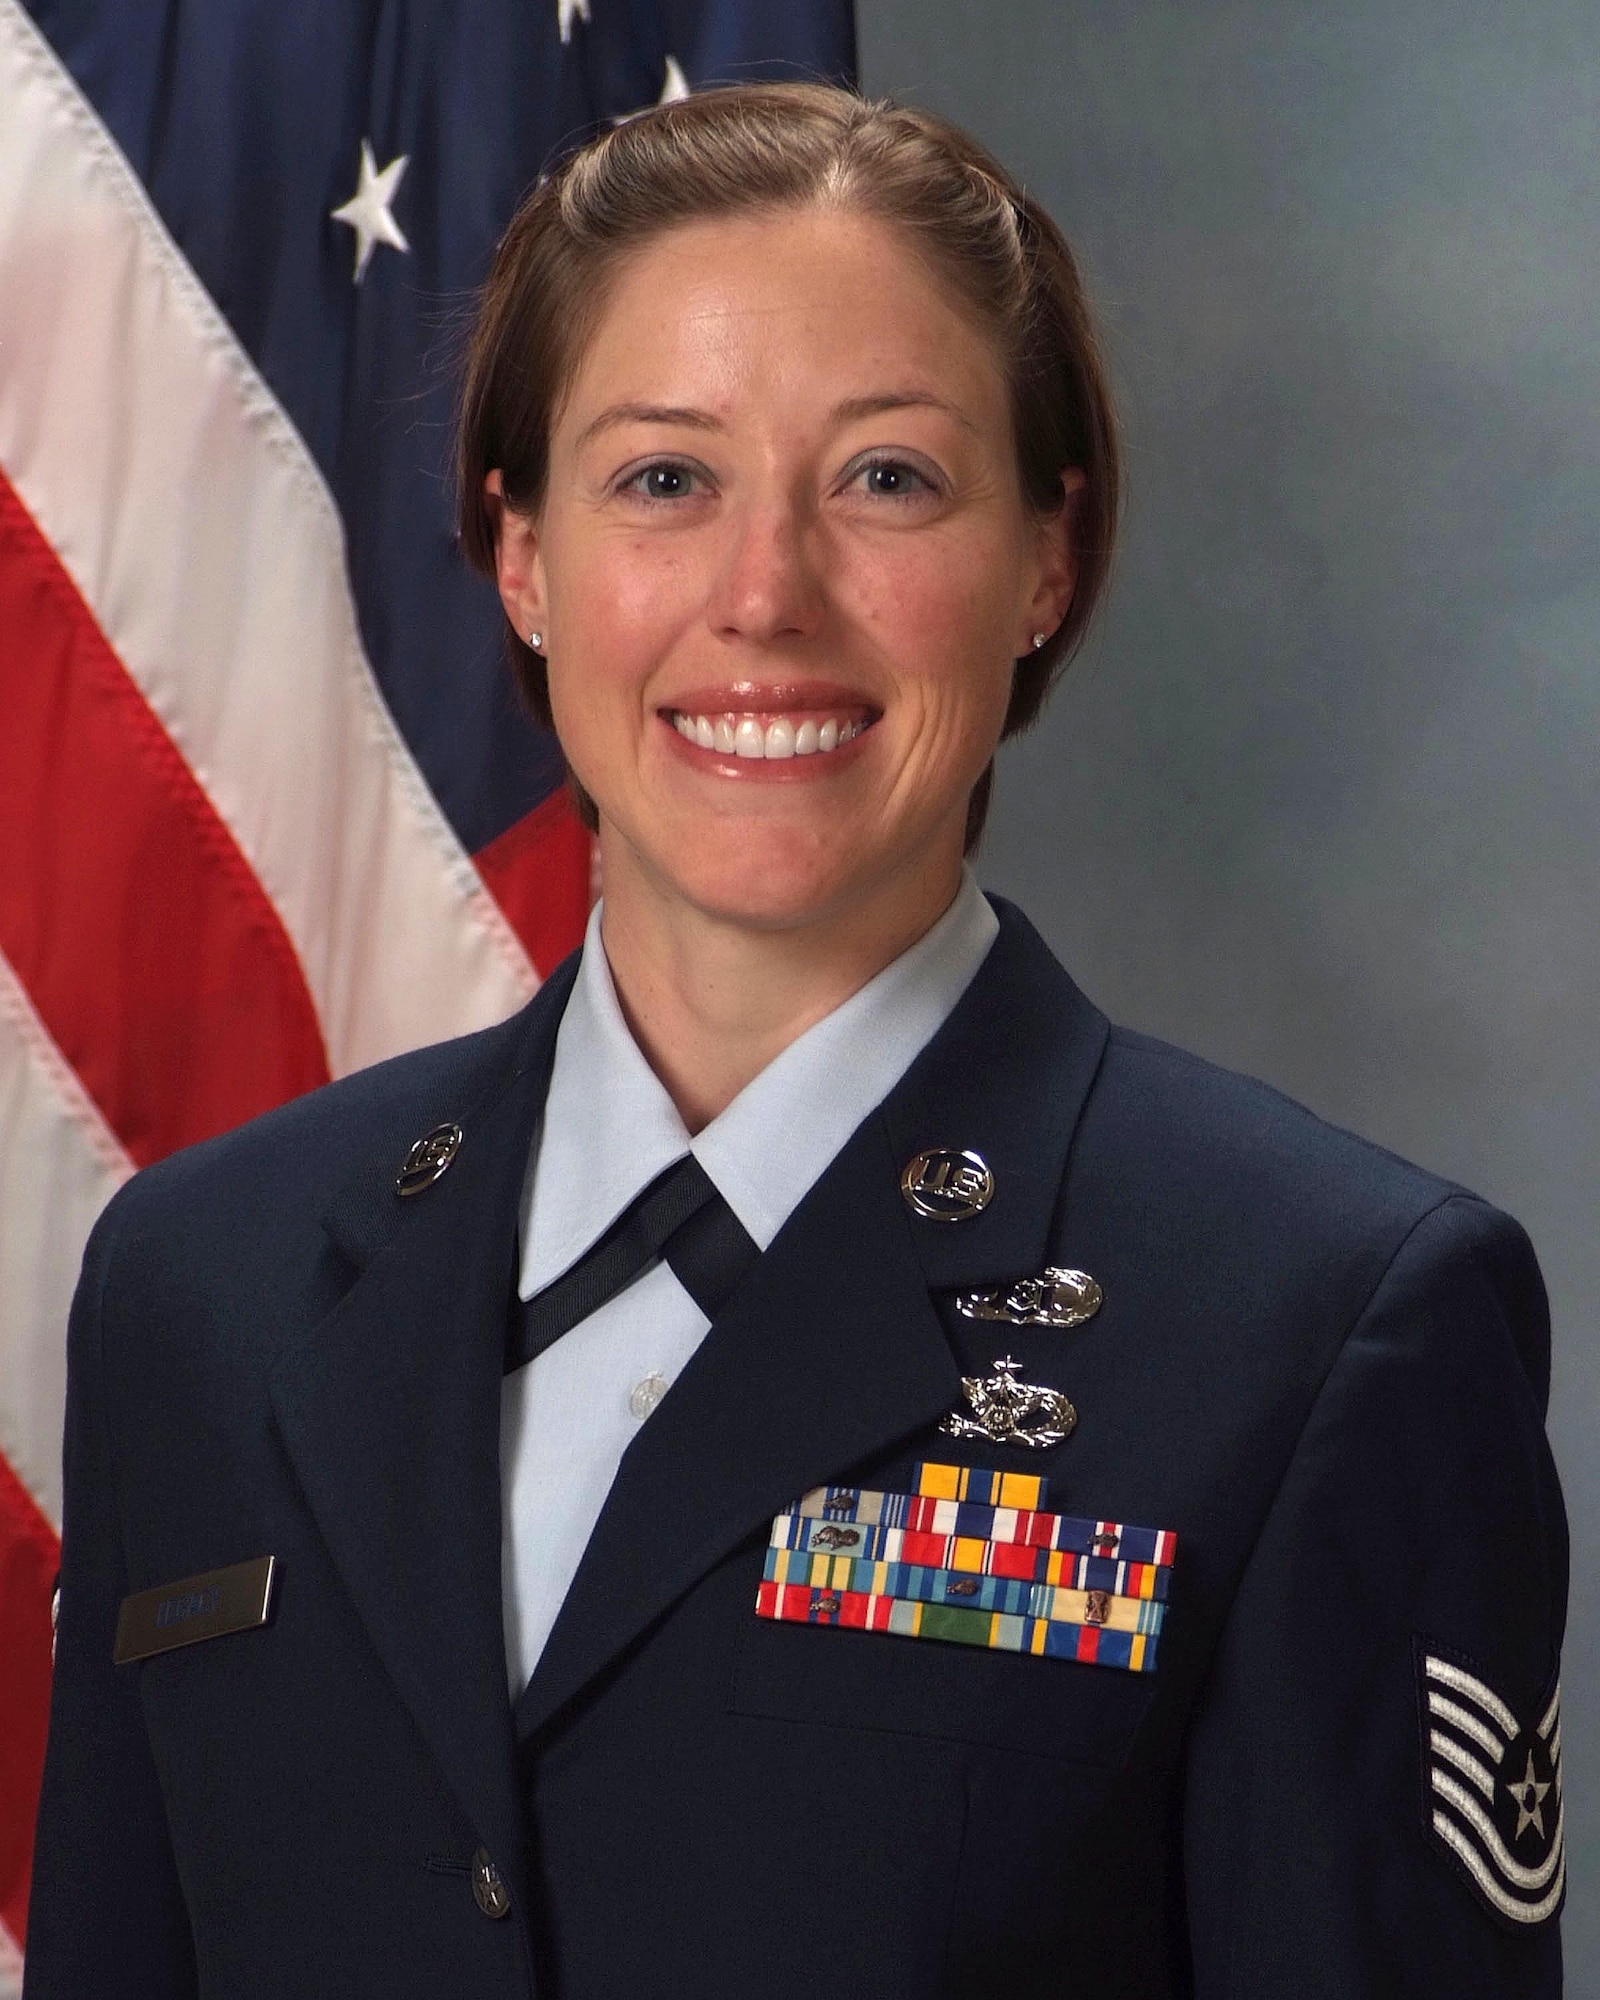 Tech. Sgt. Megan Legacy, Readiness and Emergency Management Superintendent of the 931st Civil Engineer Squadron, 931st Air Refueling Group, McConnell Air Force Base, Kan., has been named the Air Force Reserve Command Outstanding Non-commissioned Officer of the Year. (Courtesy photo)